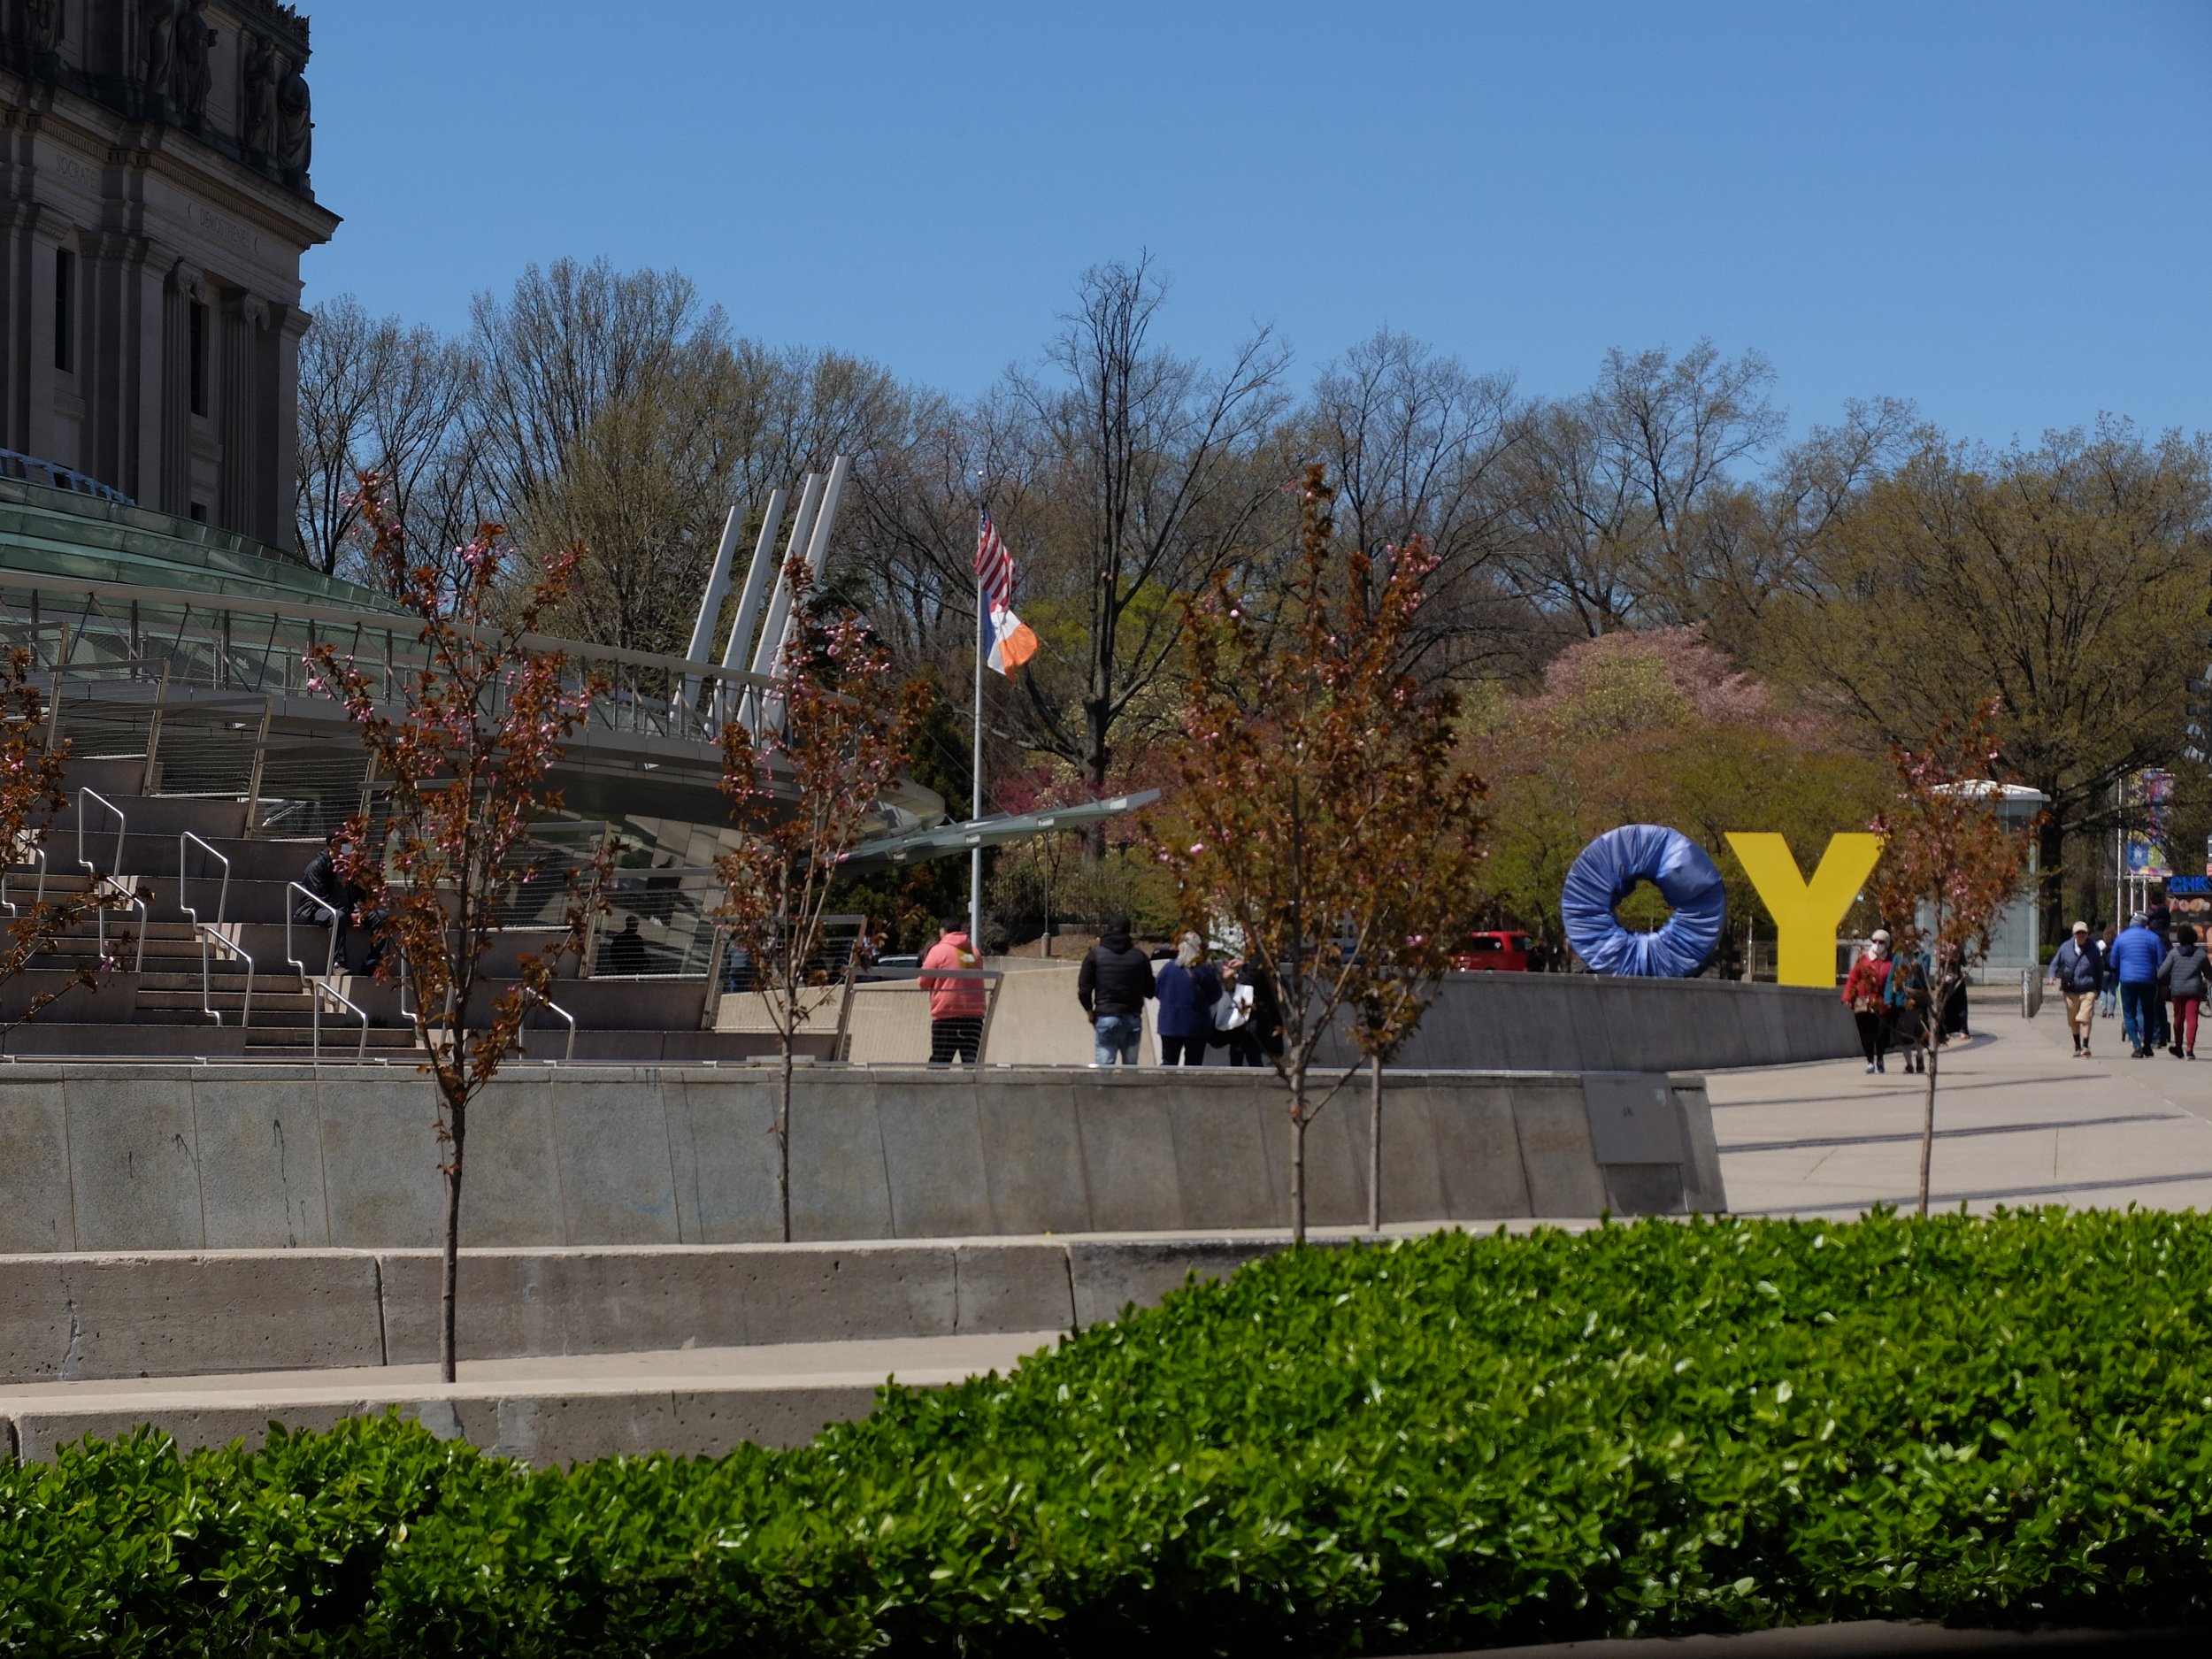 The "OY"/"YO" sculpture outside the Brooklyn Museum draped in solidarity with the Ukraine.